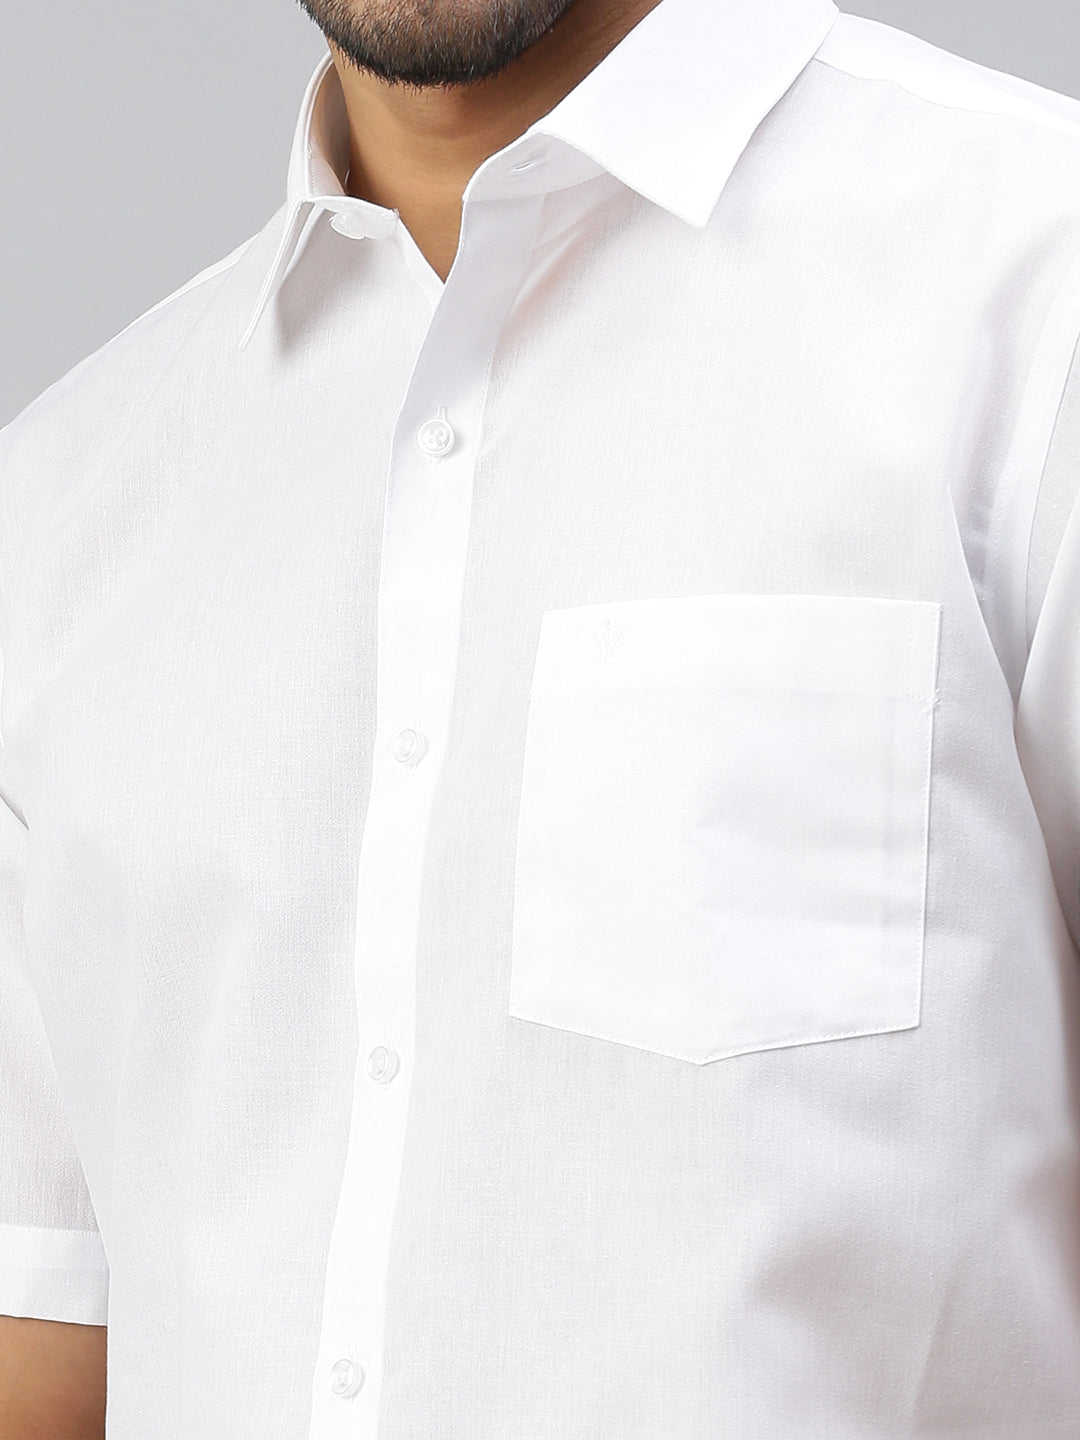 Mens Poly Cotton Half Sleeves Prestigious Fit White Shirt Minister -Zoom view